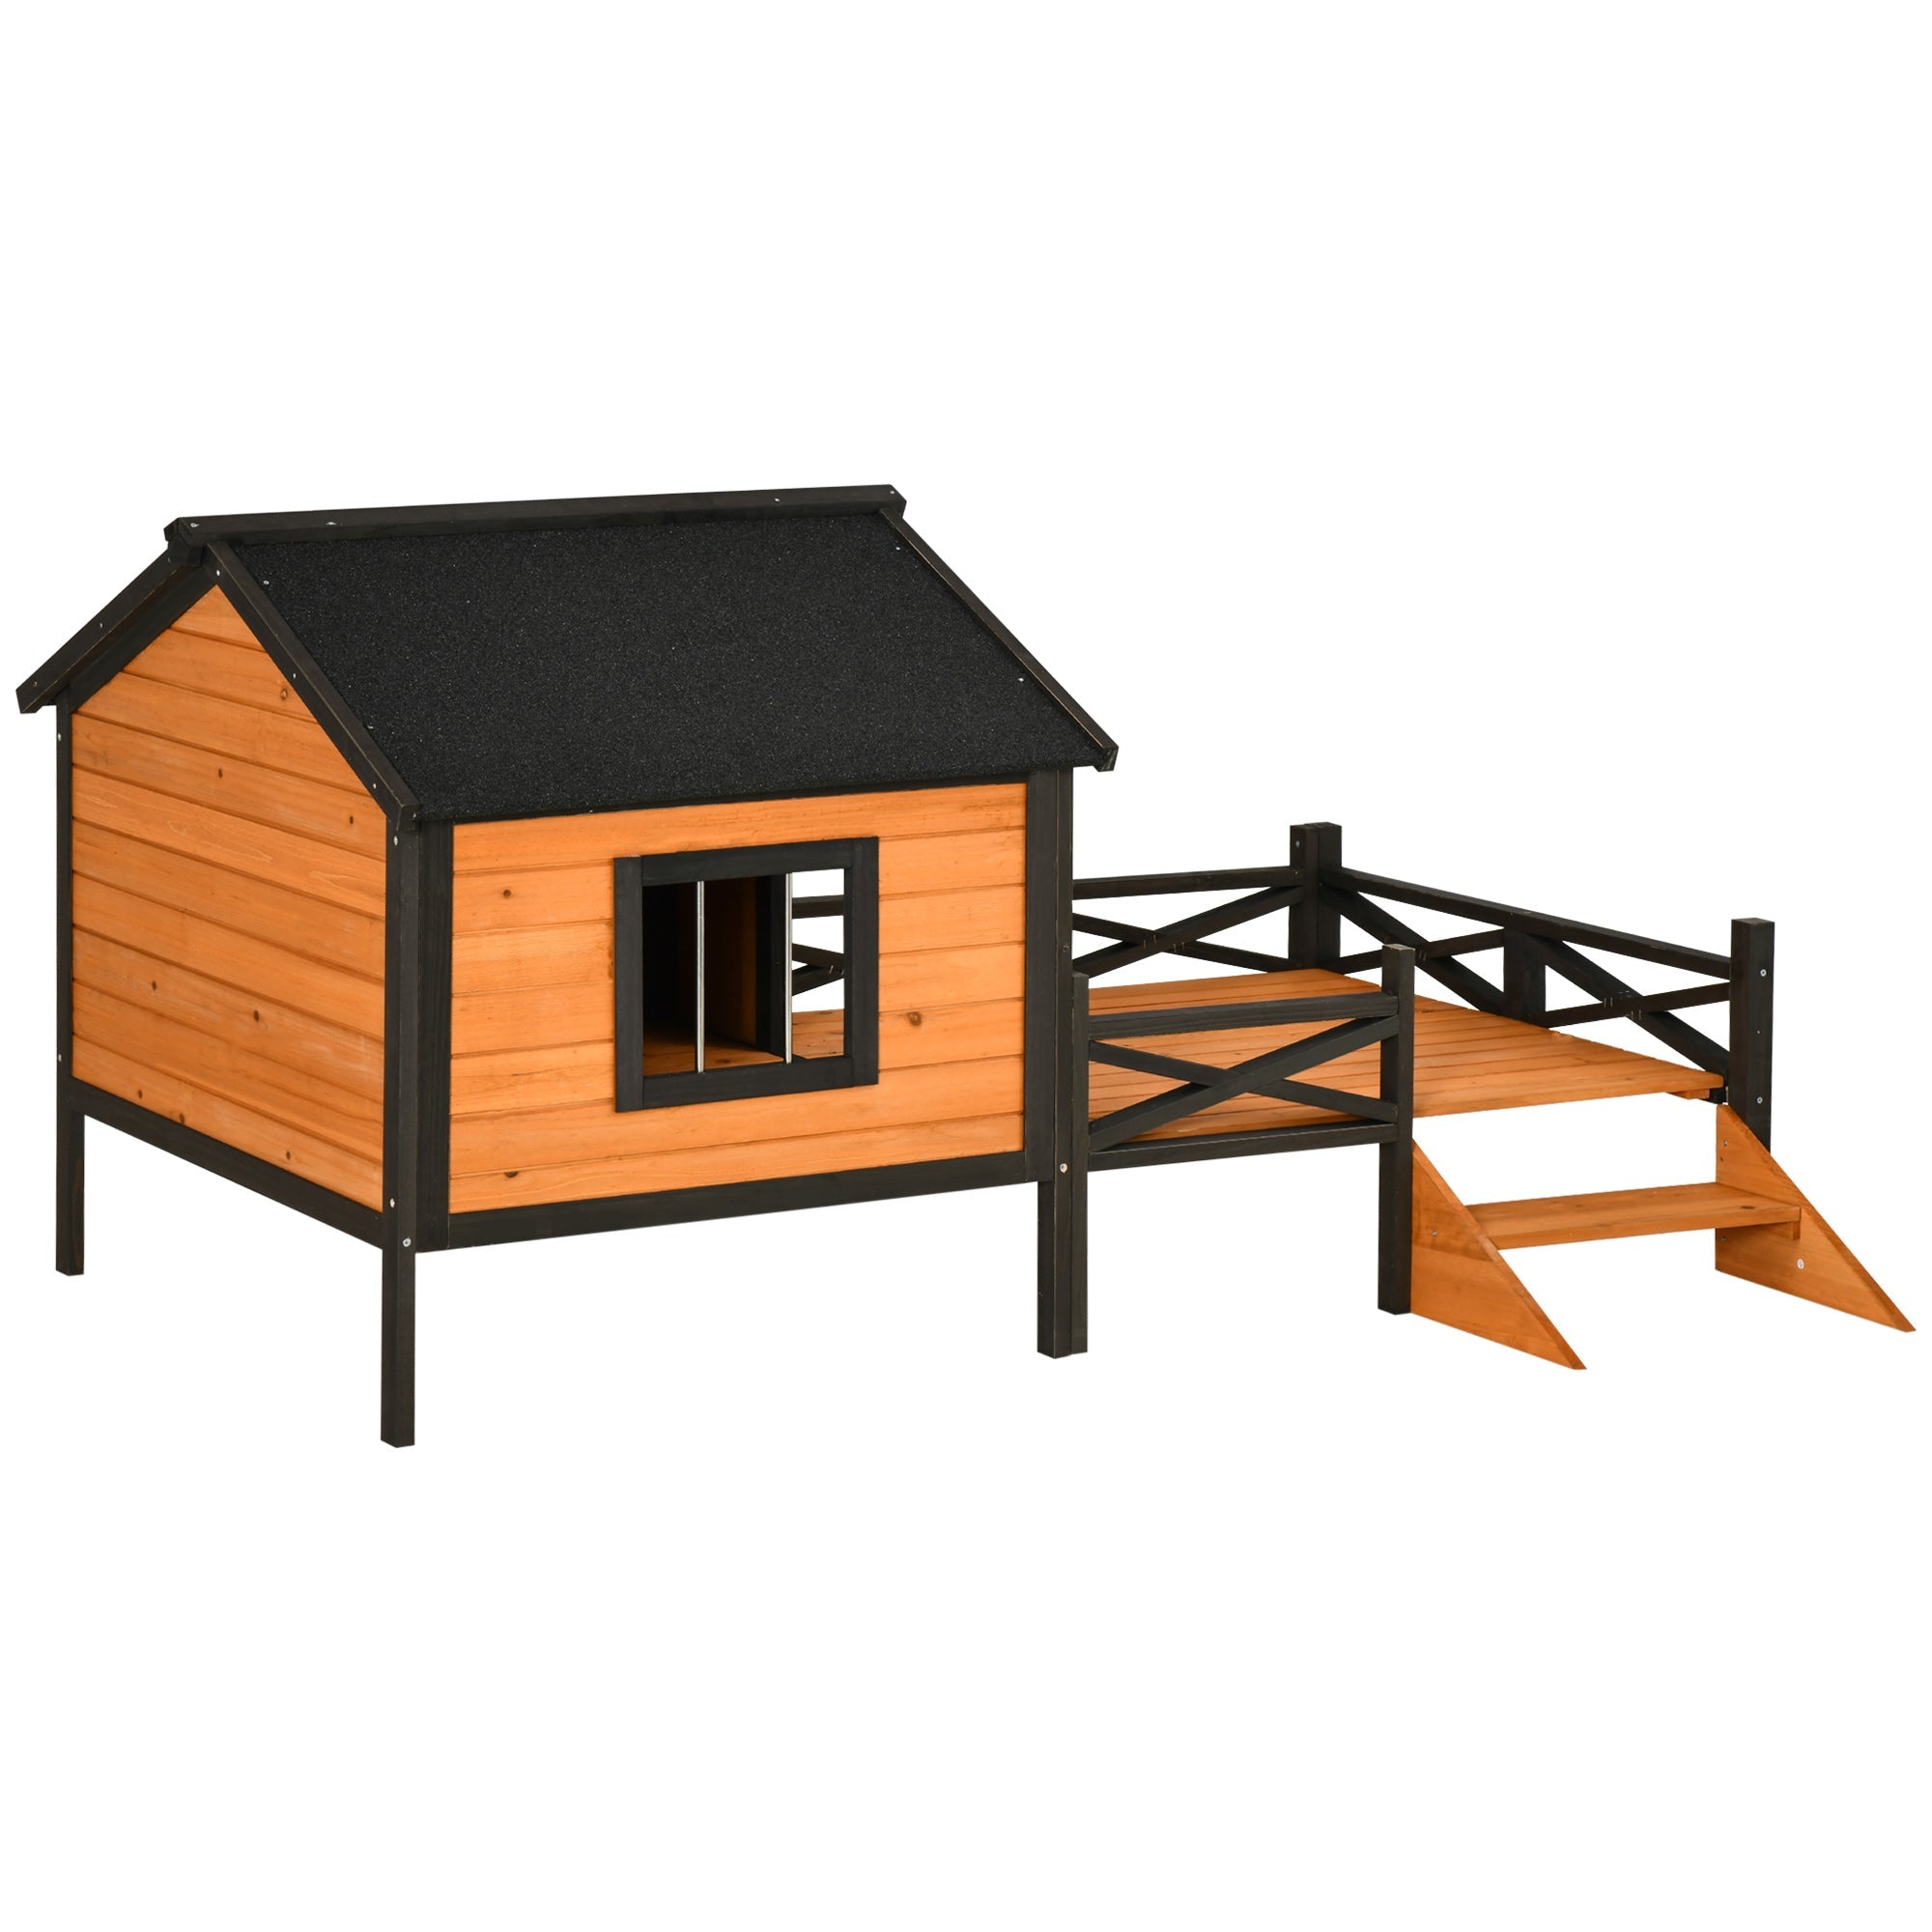 Large Dog House with Porch for Expansive Size, XL Wooden Elevated Dog Shelter, 67